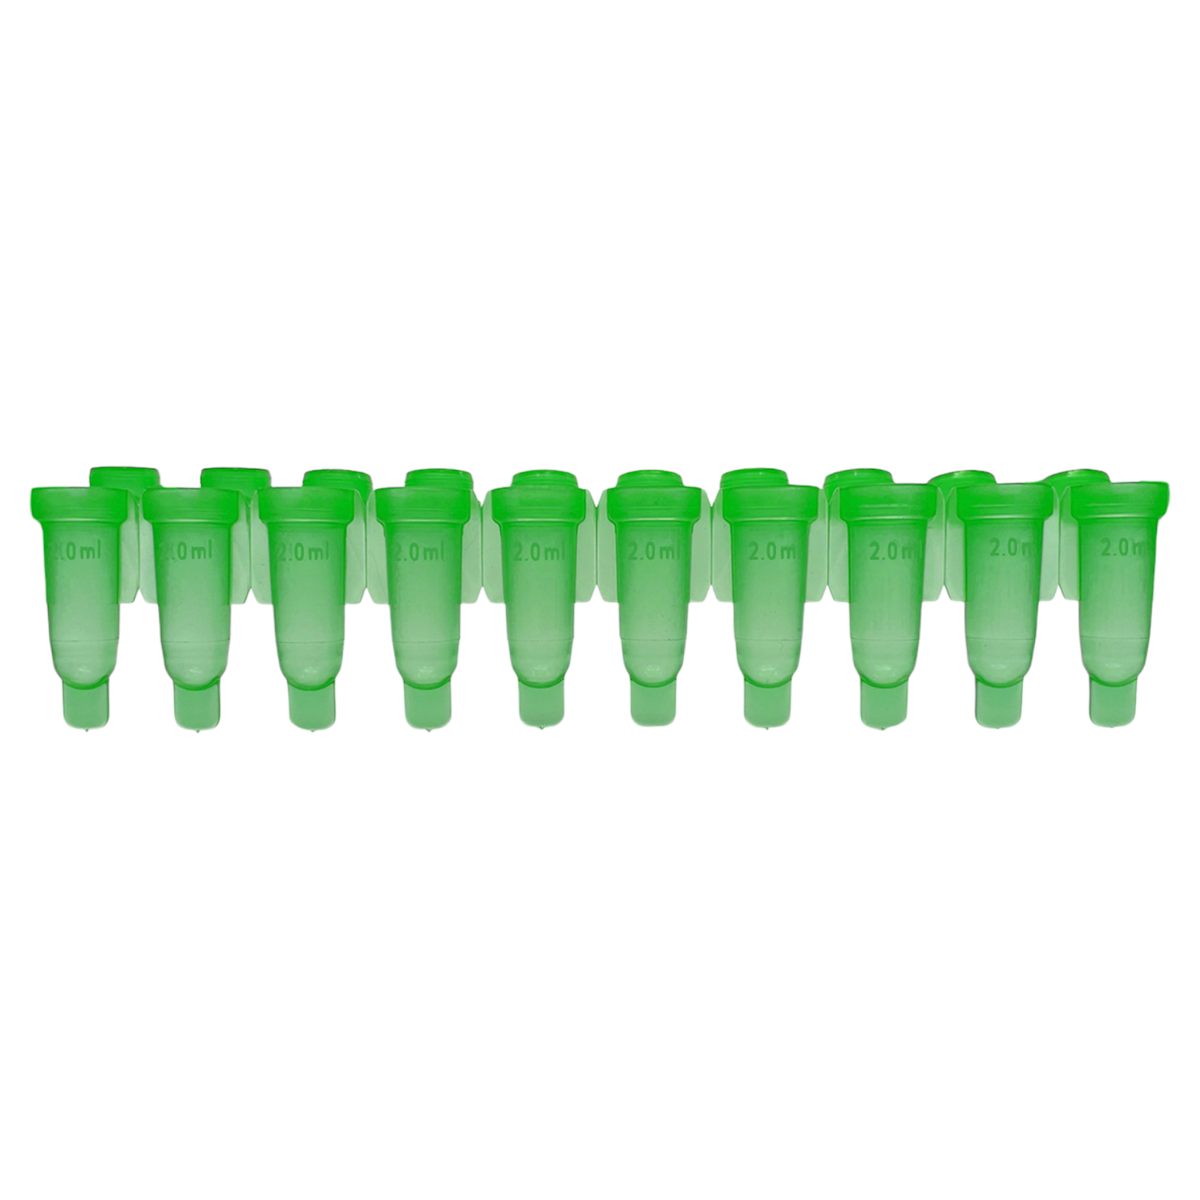 RocketMolds™ Suppository Compounding Molds 2.0ml